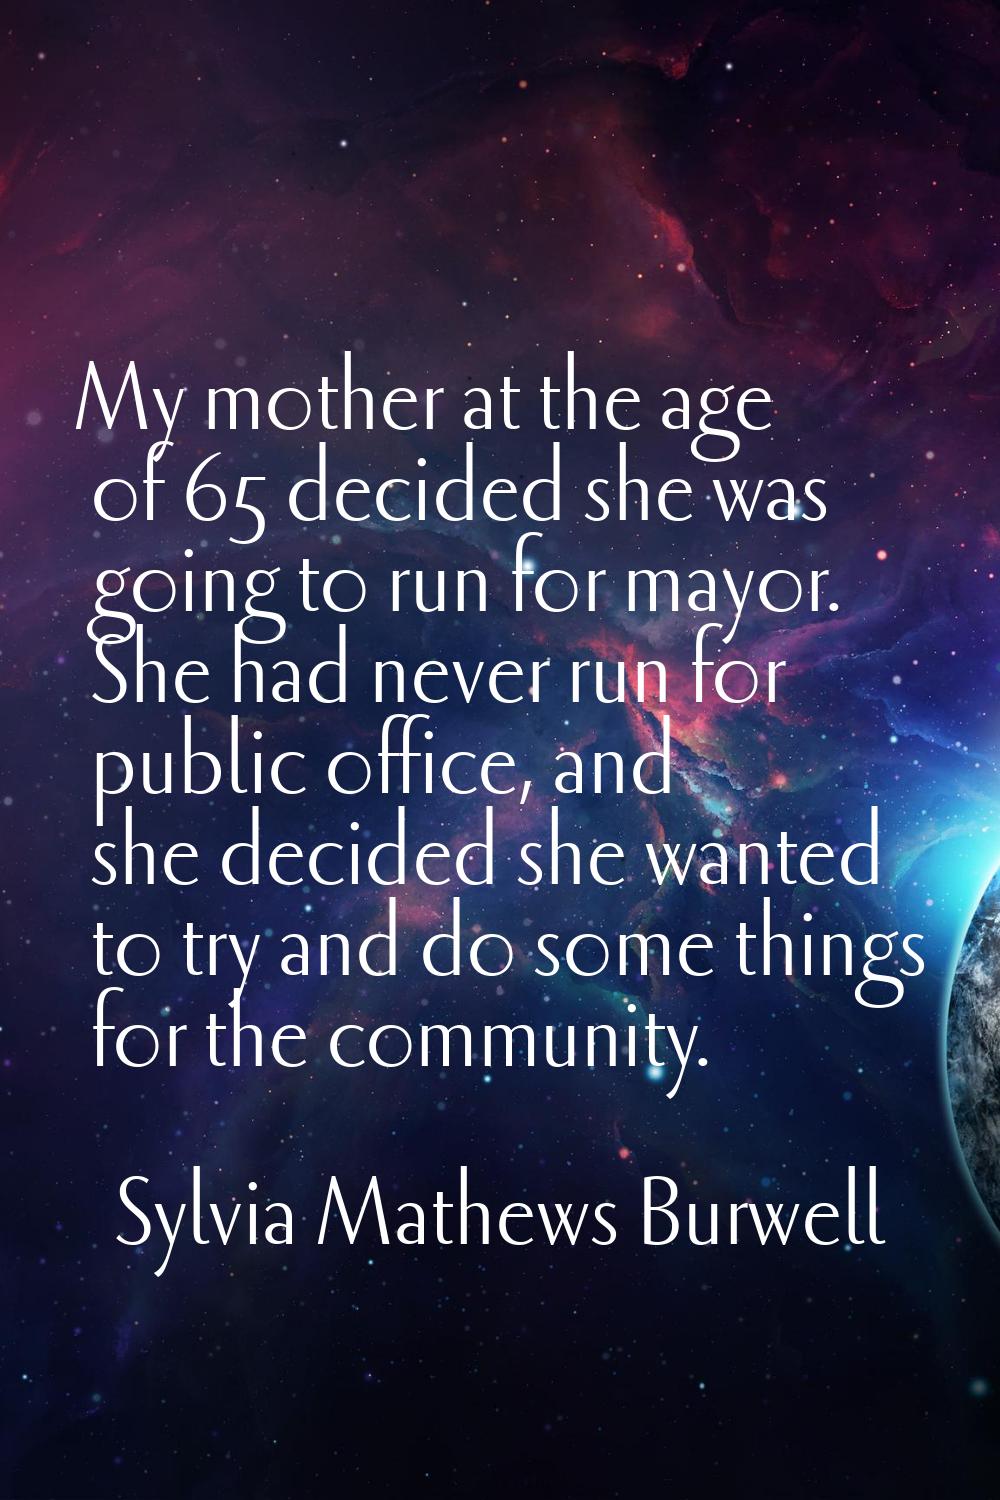 My mother at the age of 65 decided she was going to run for mayor. She had never run for public off